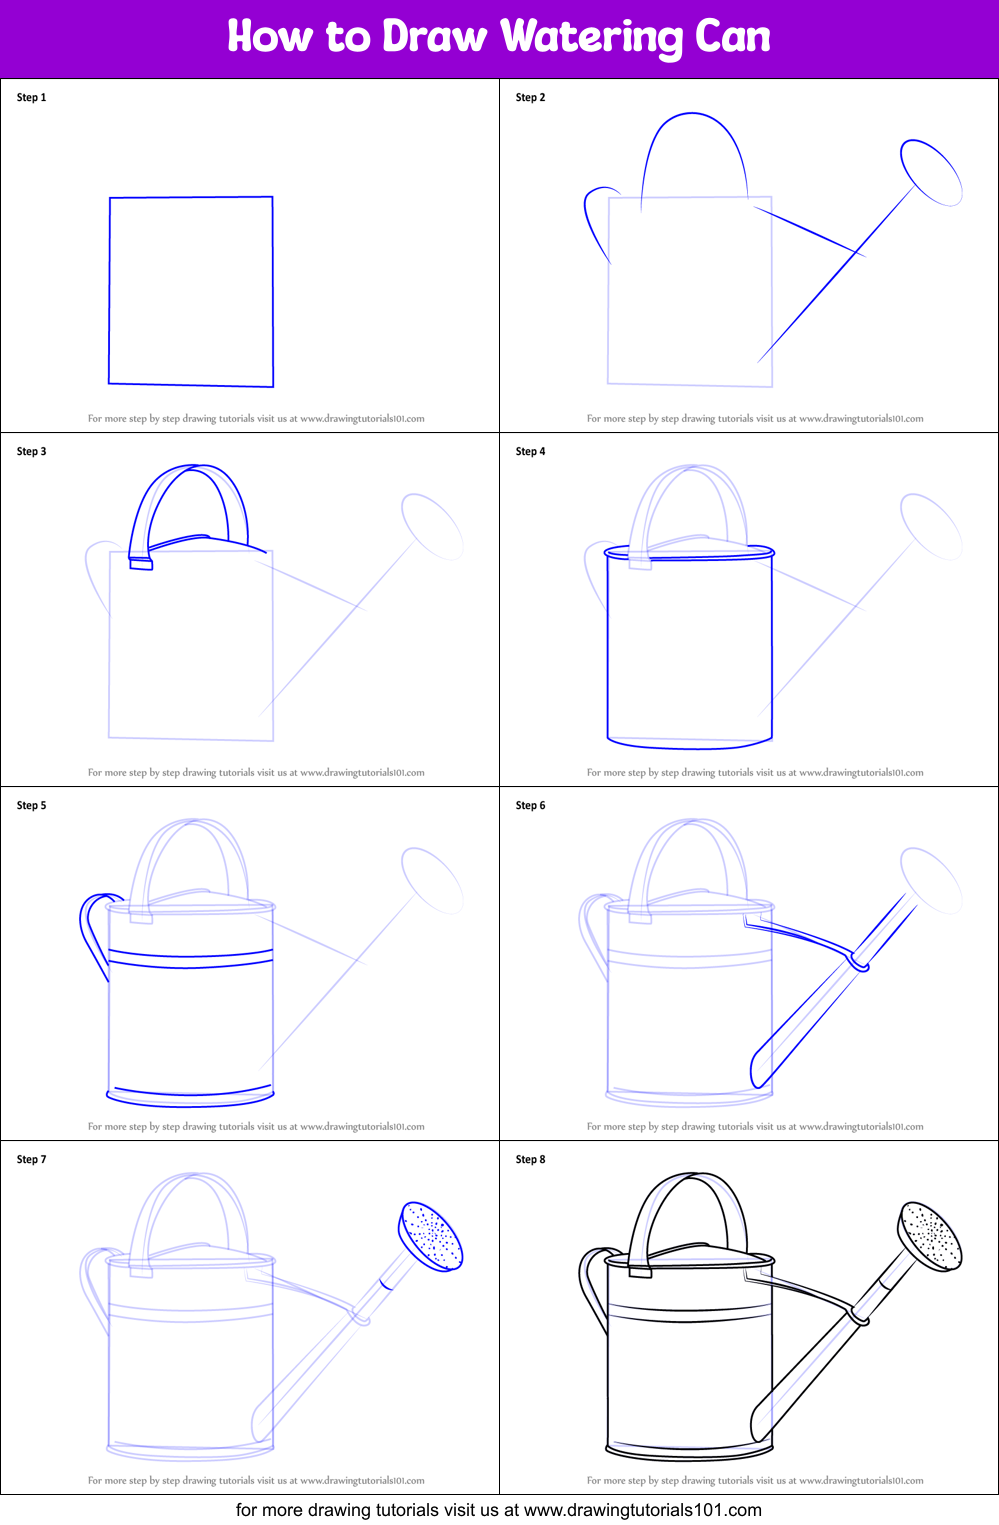 How to Draw Watering Can printable step by step drawing sheet